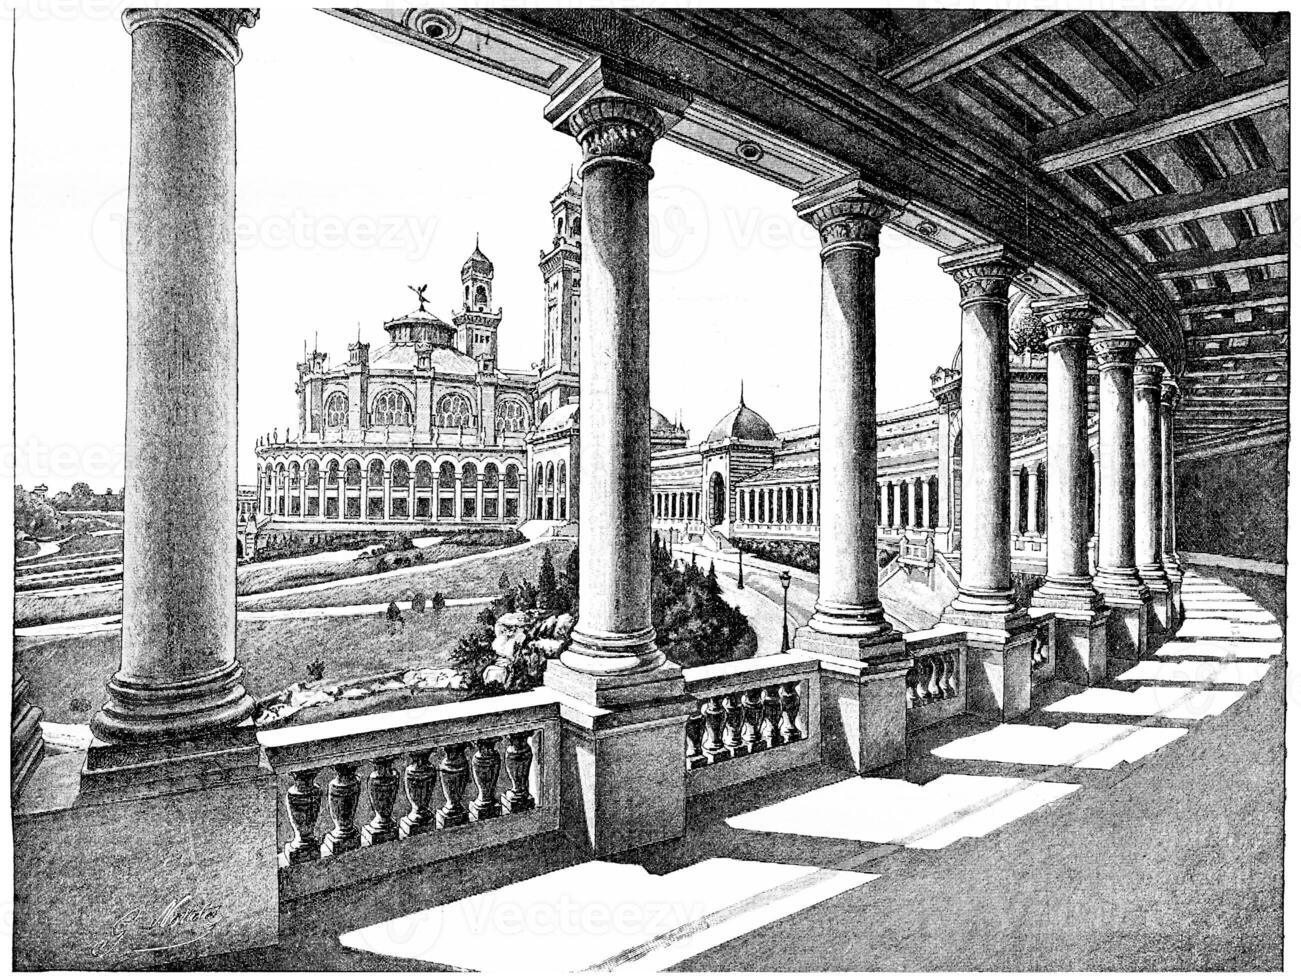 The palace of the Trocadero given its large gallery, vintage engraving. photo